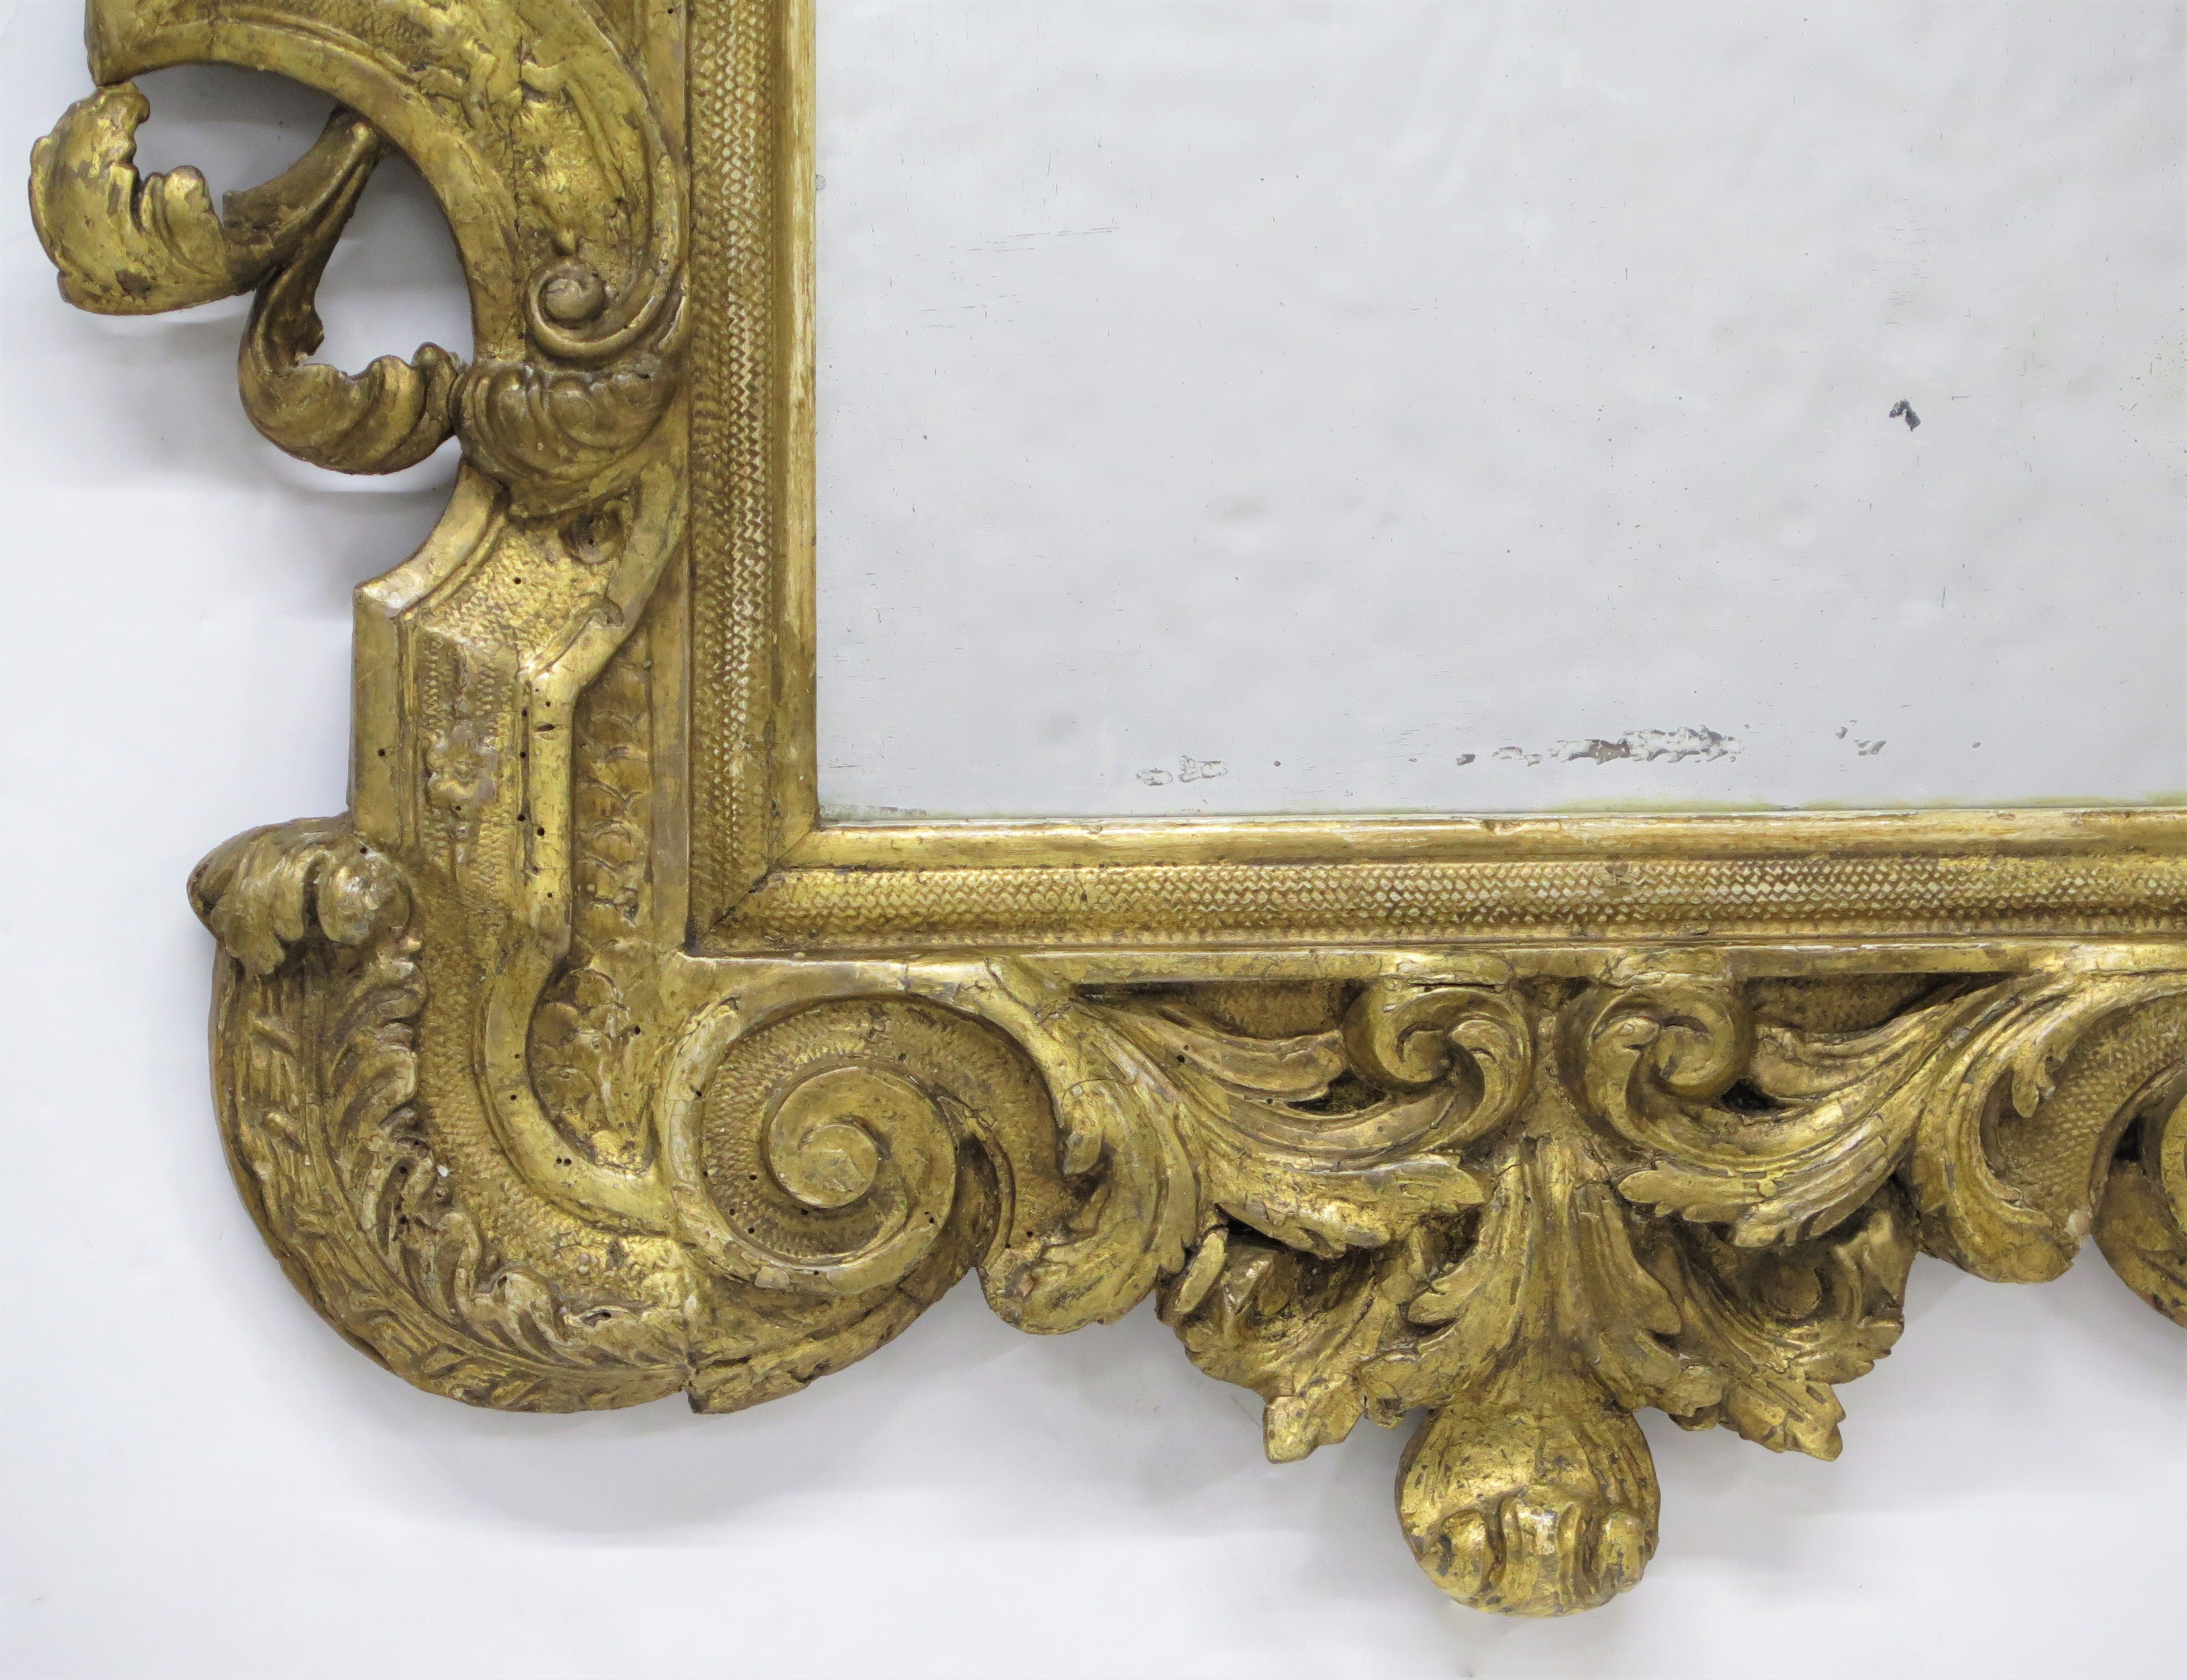 Carved and Gilded Italian Looking Glass / Mirror